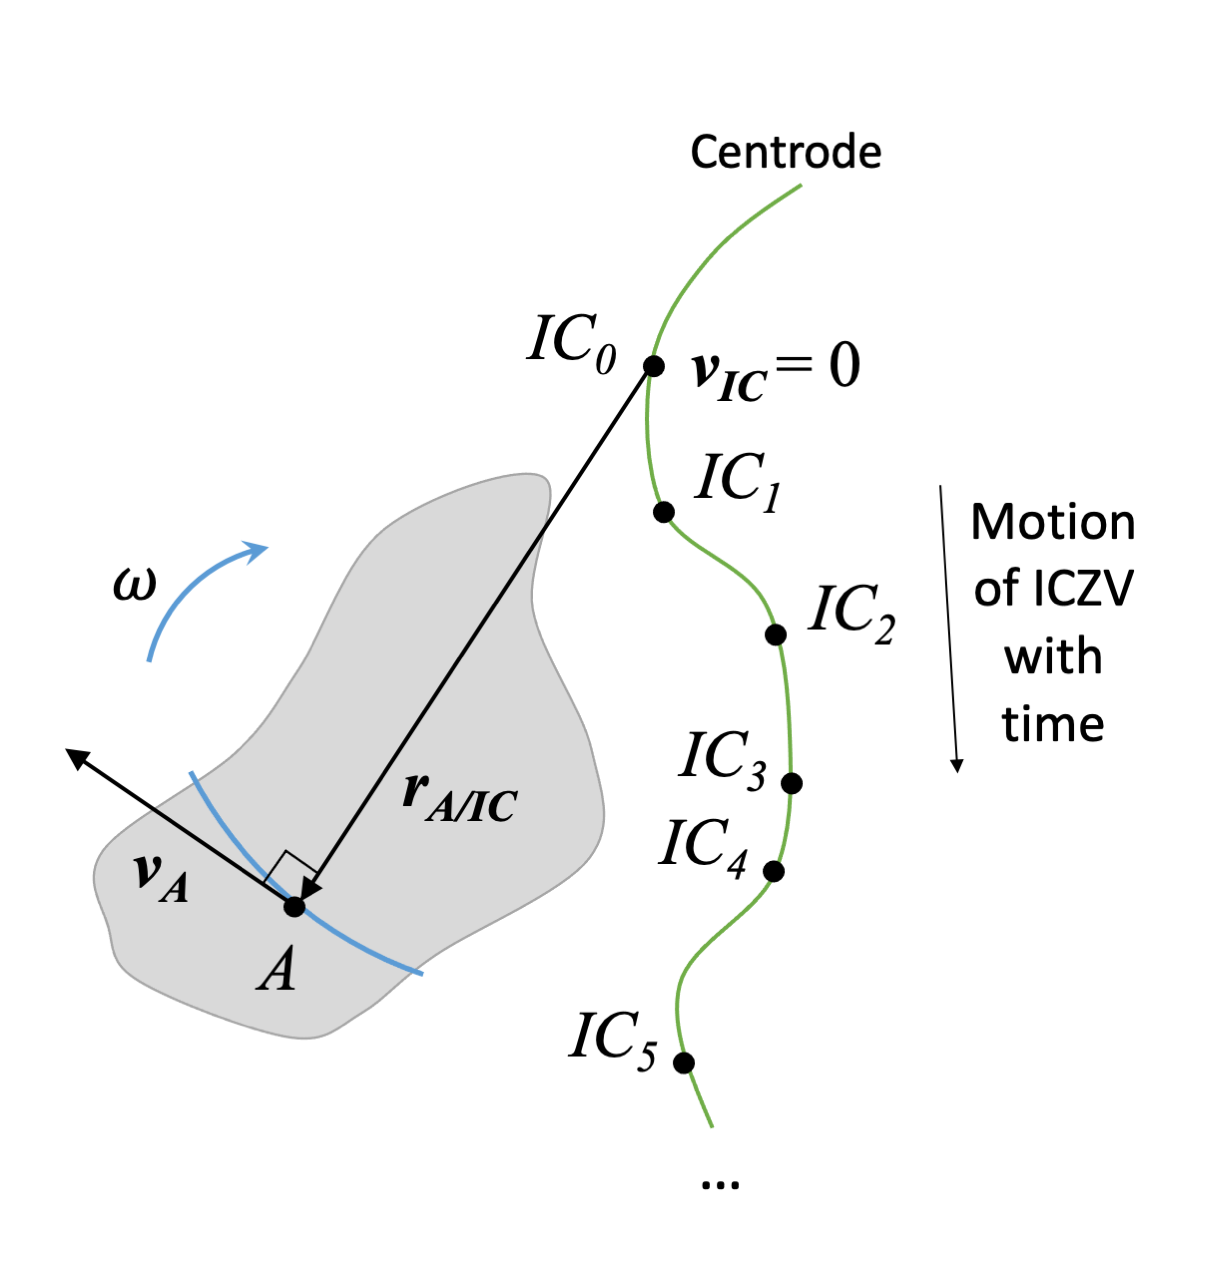 A rigid body showing the centrode